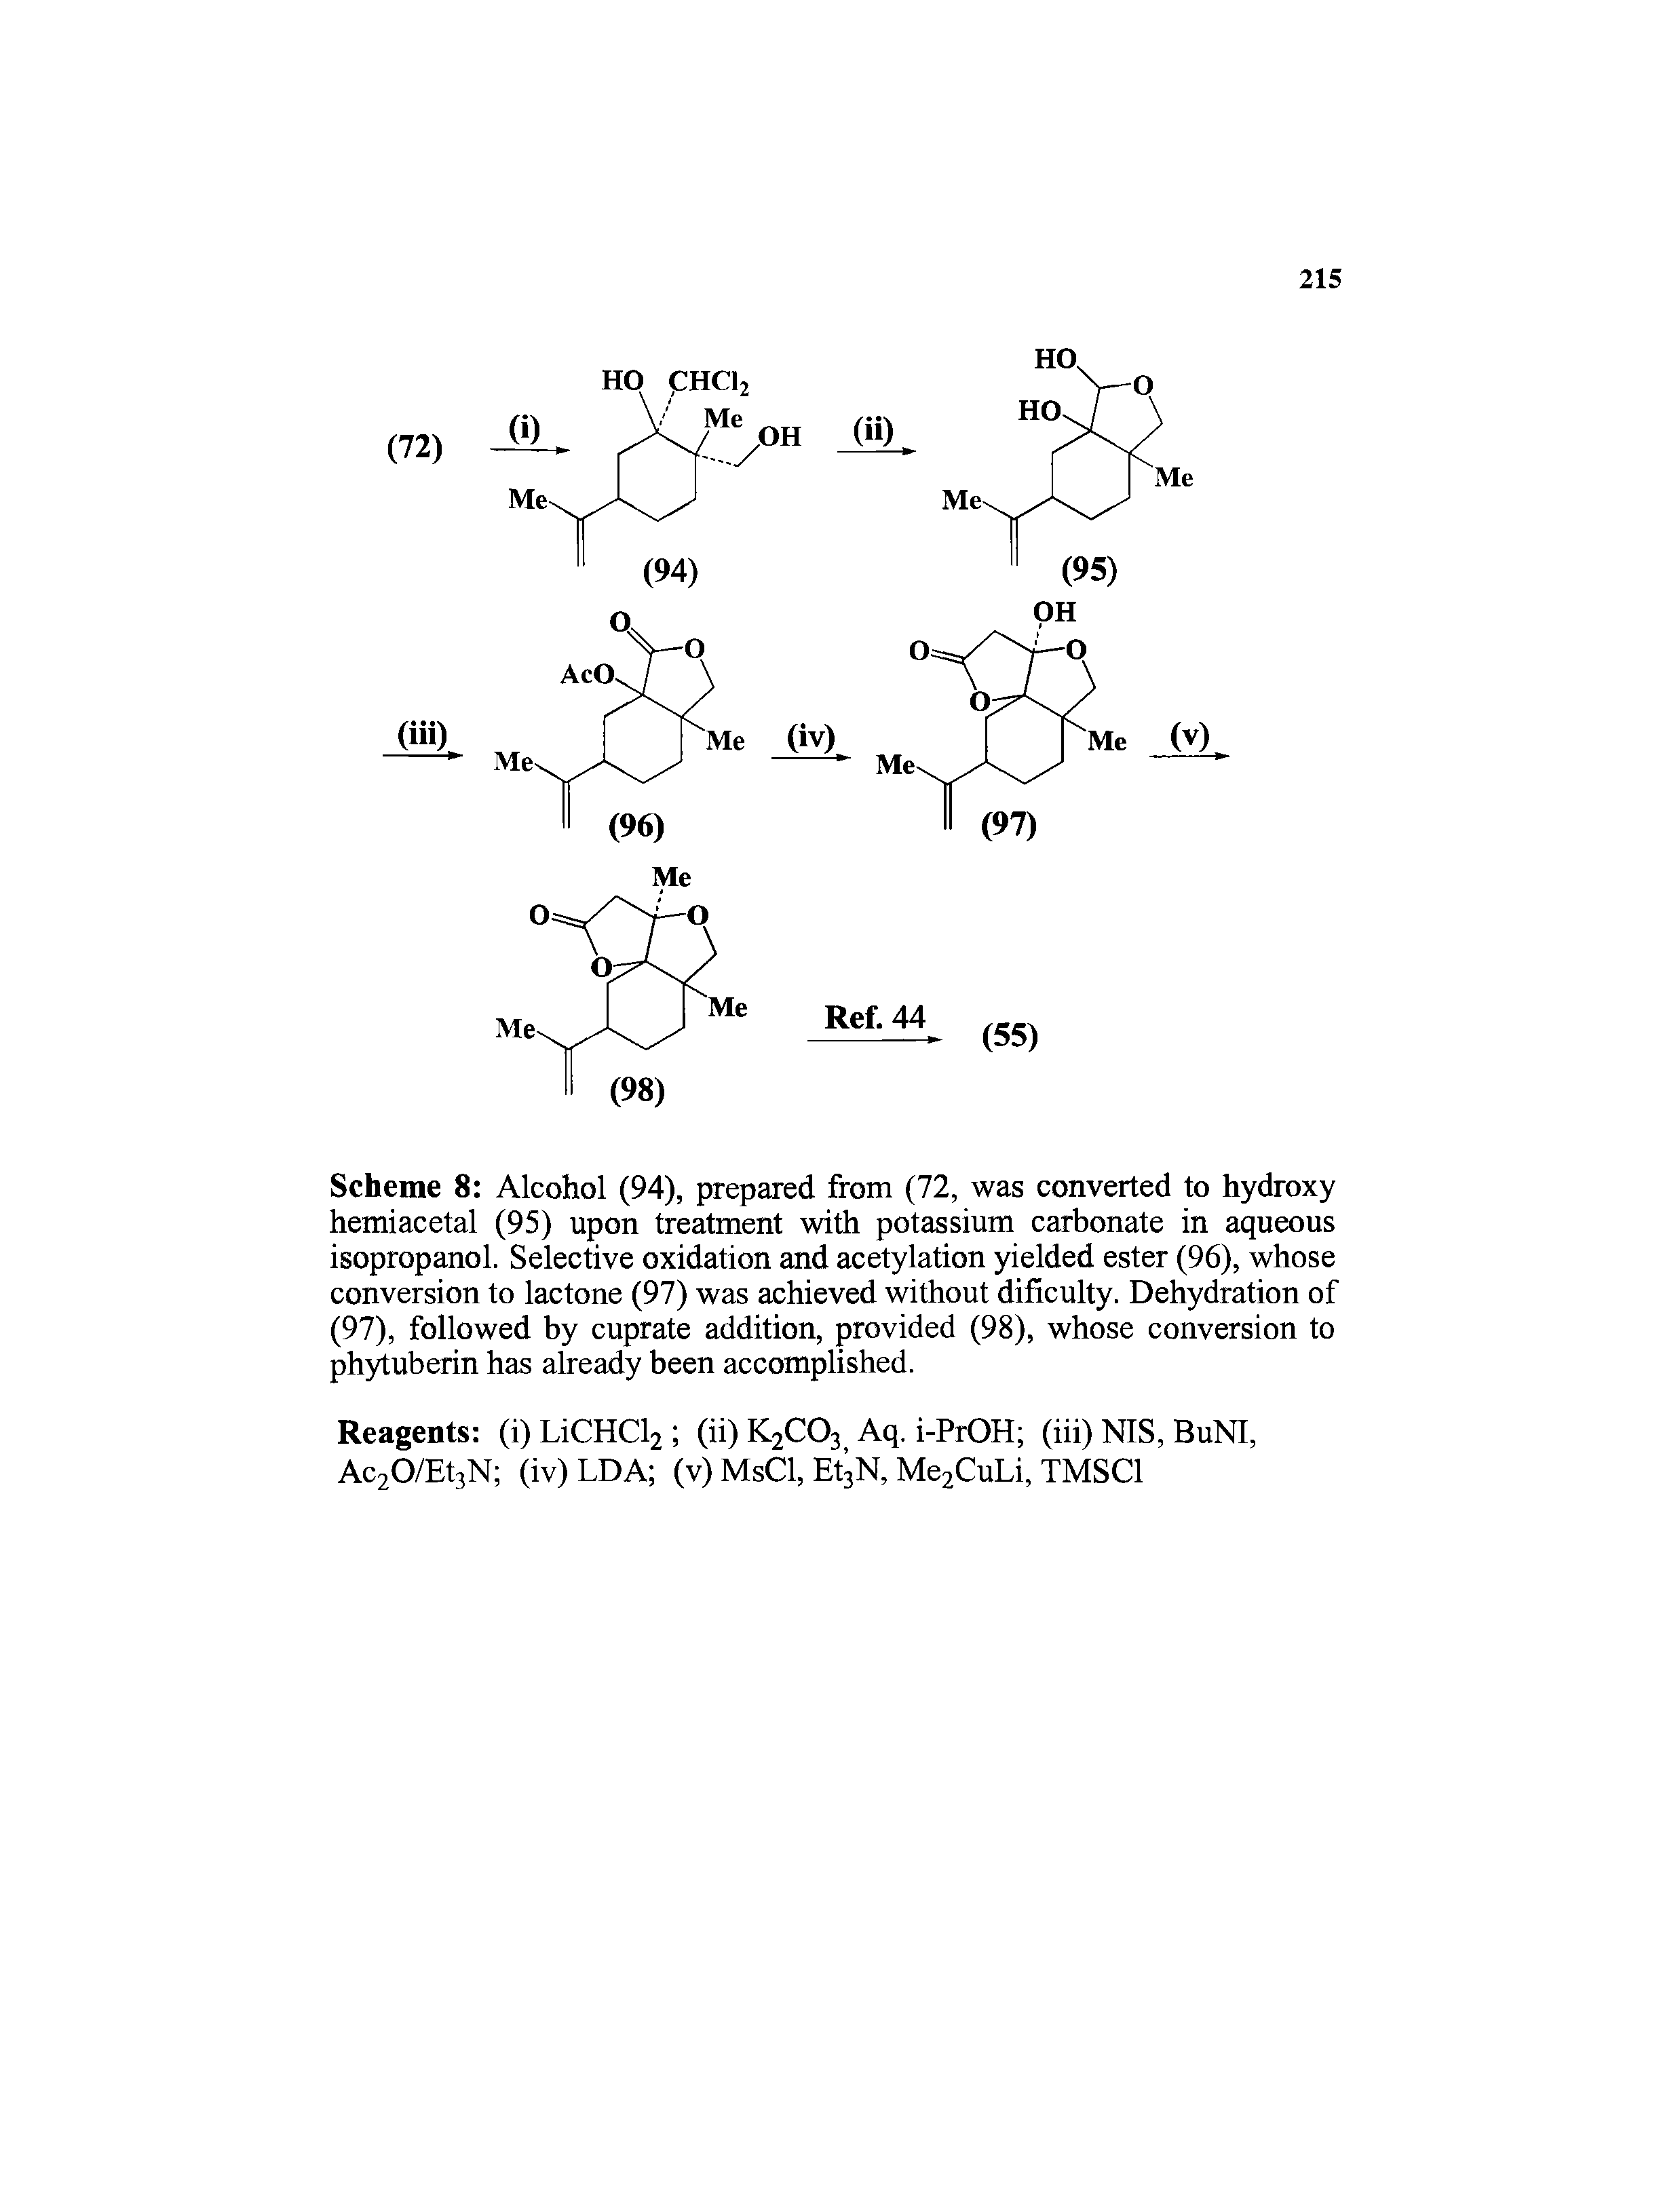 Scheme 8 Alcohol (94), prepared from (72, was converted to hydroxy hemiacetal (95) upon treatment with potassium carbonate in aqueous isopropanol. Selective oxidation and acetylation yielded ester (96), whose conversion to lactone (97) was achieved without dificulty. Dehydration of (97), followed by cuprate addition, provided (98), whose conversion to phytuberin has already been accomplished.